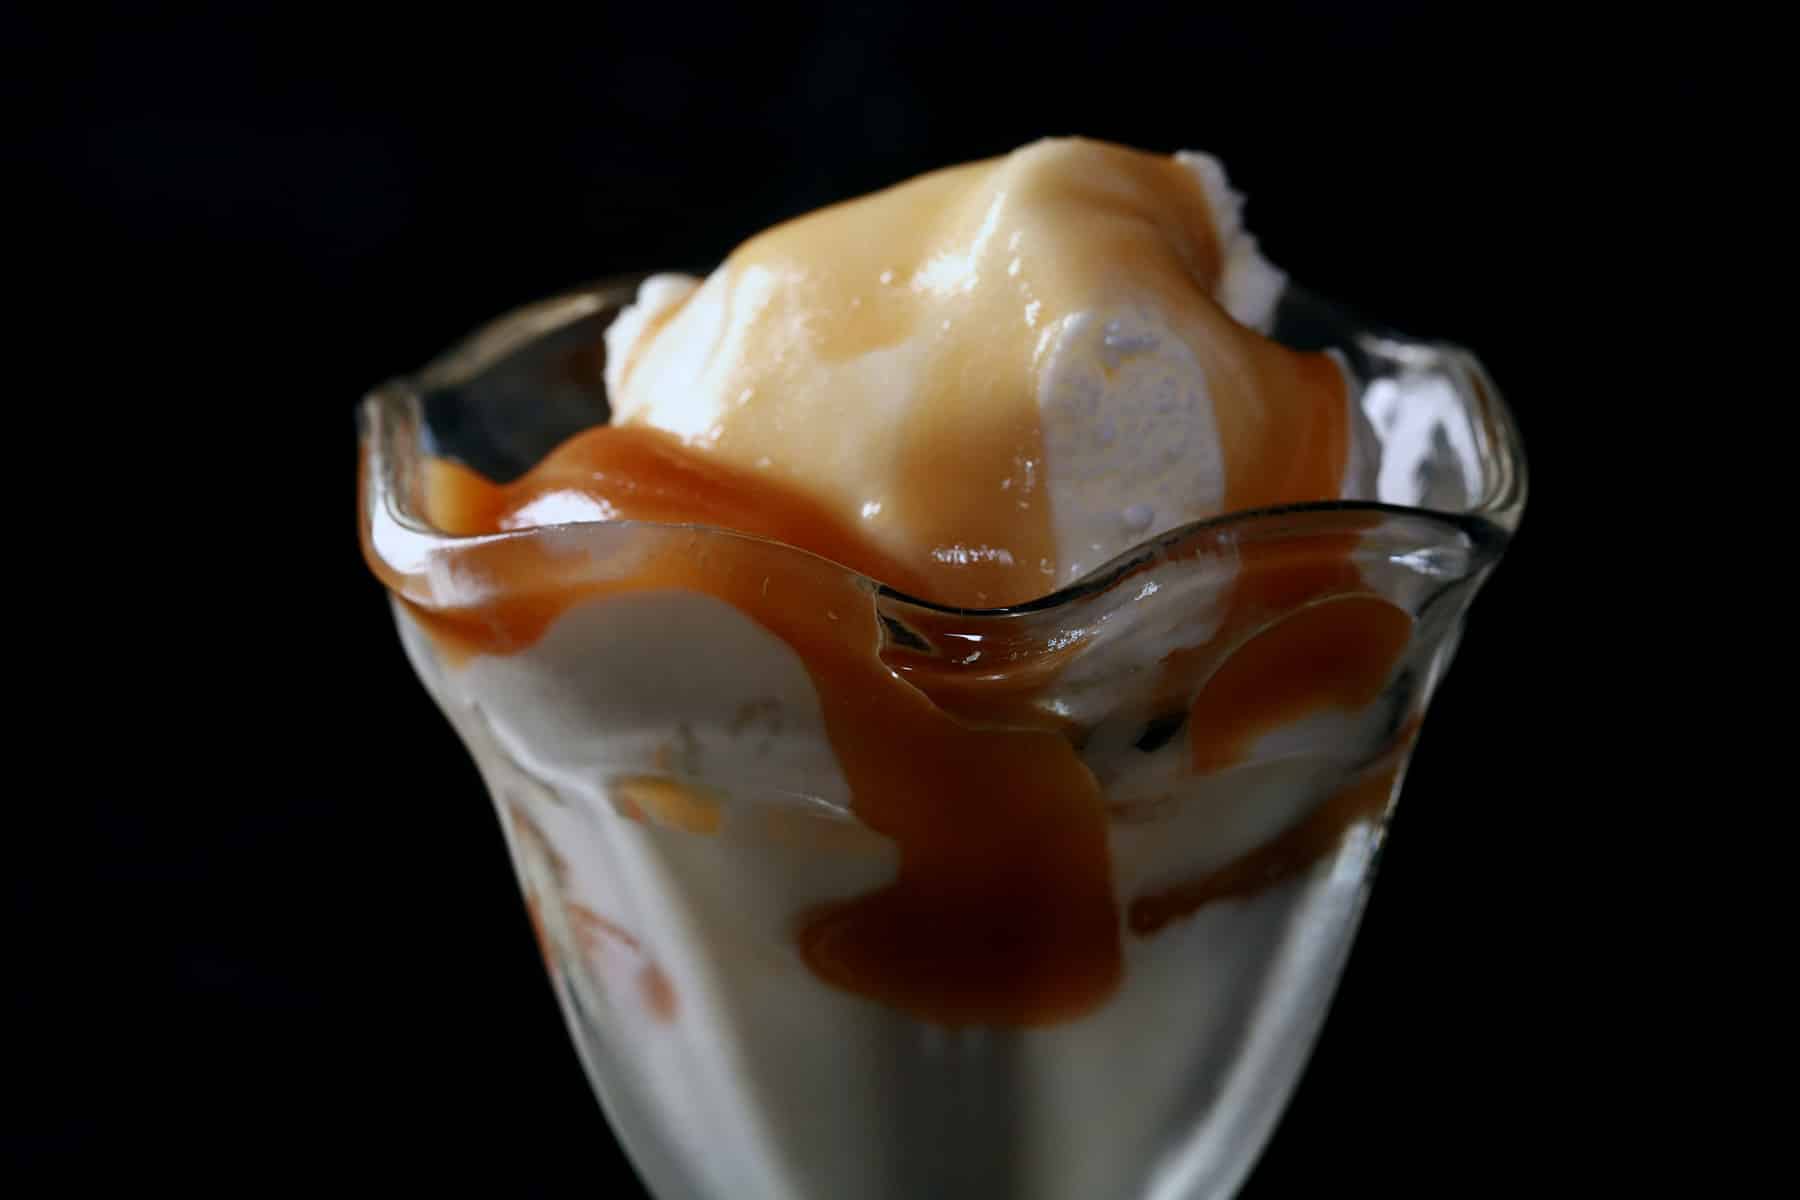 A bowl of vanilla ice cream, covered in maple caramel.